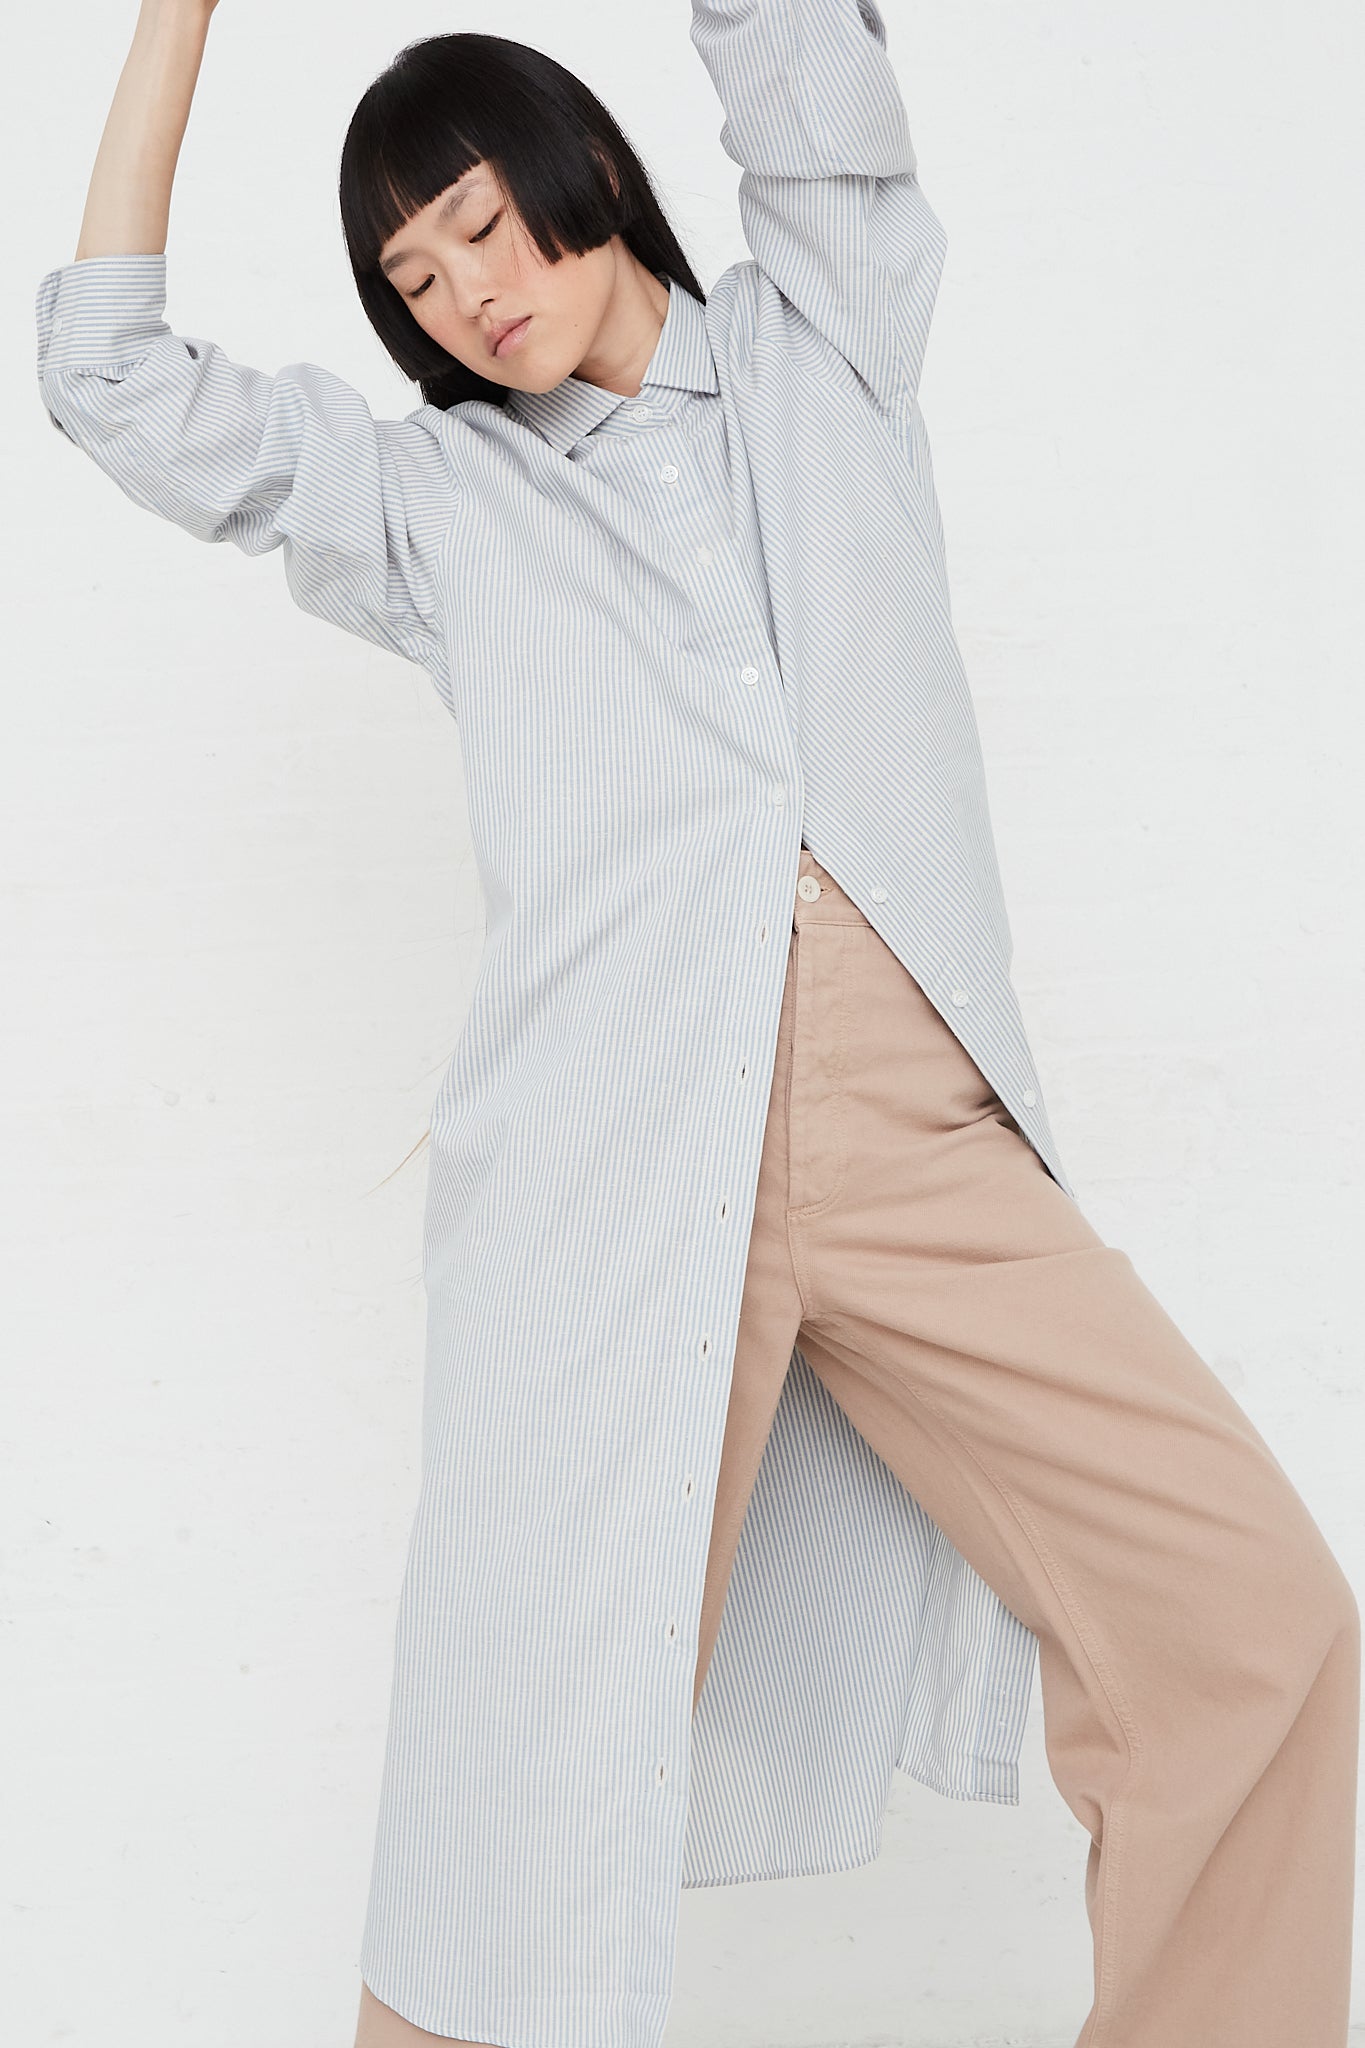 Ole Long Sleeve Shirt Dress in Organic Cotton by Baserange for Oroboro Front